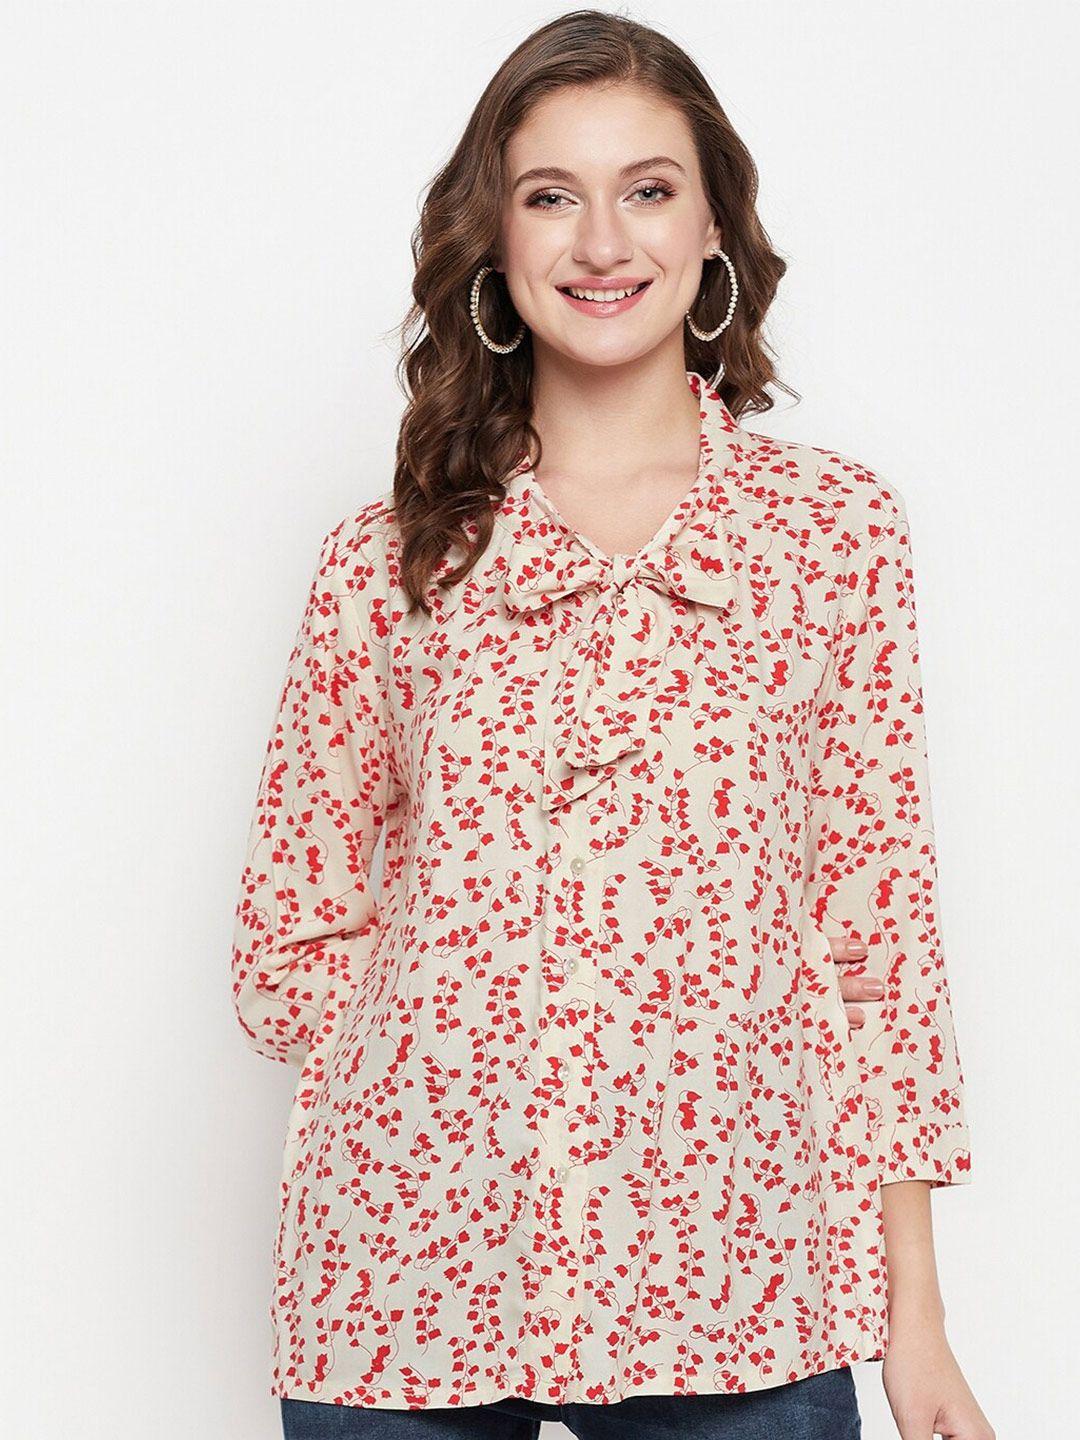 cantabil floral printed tie-up neck top